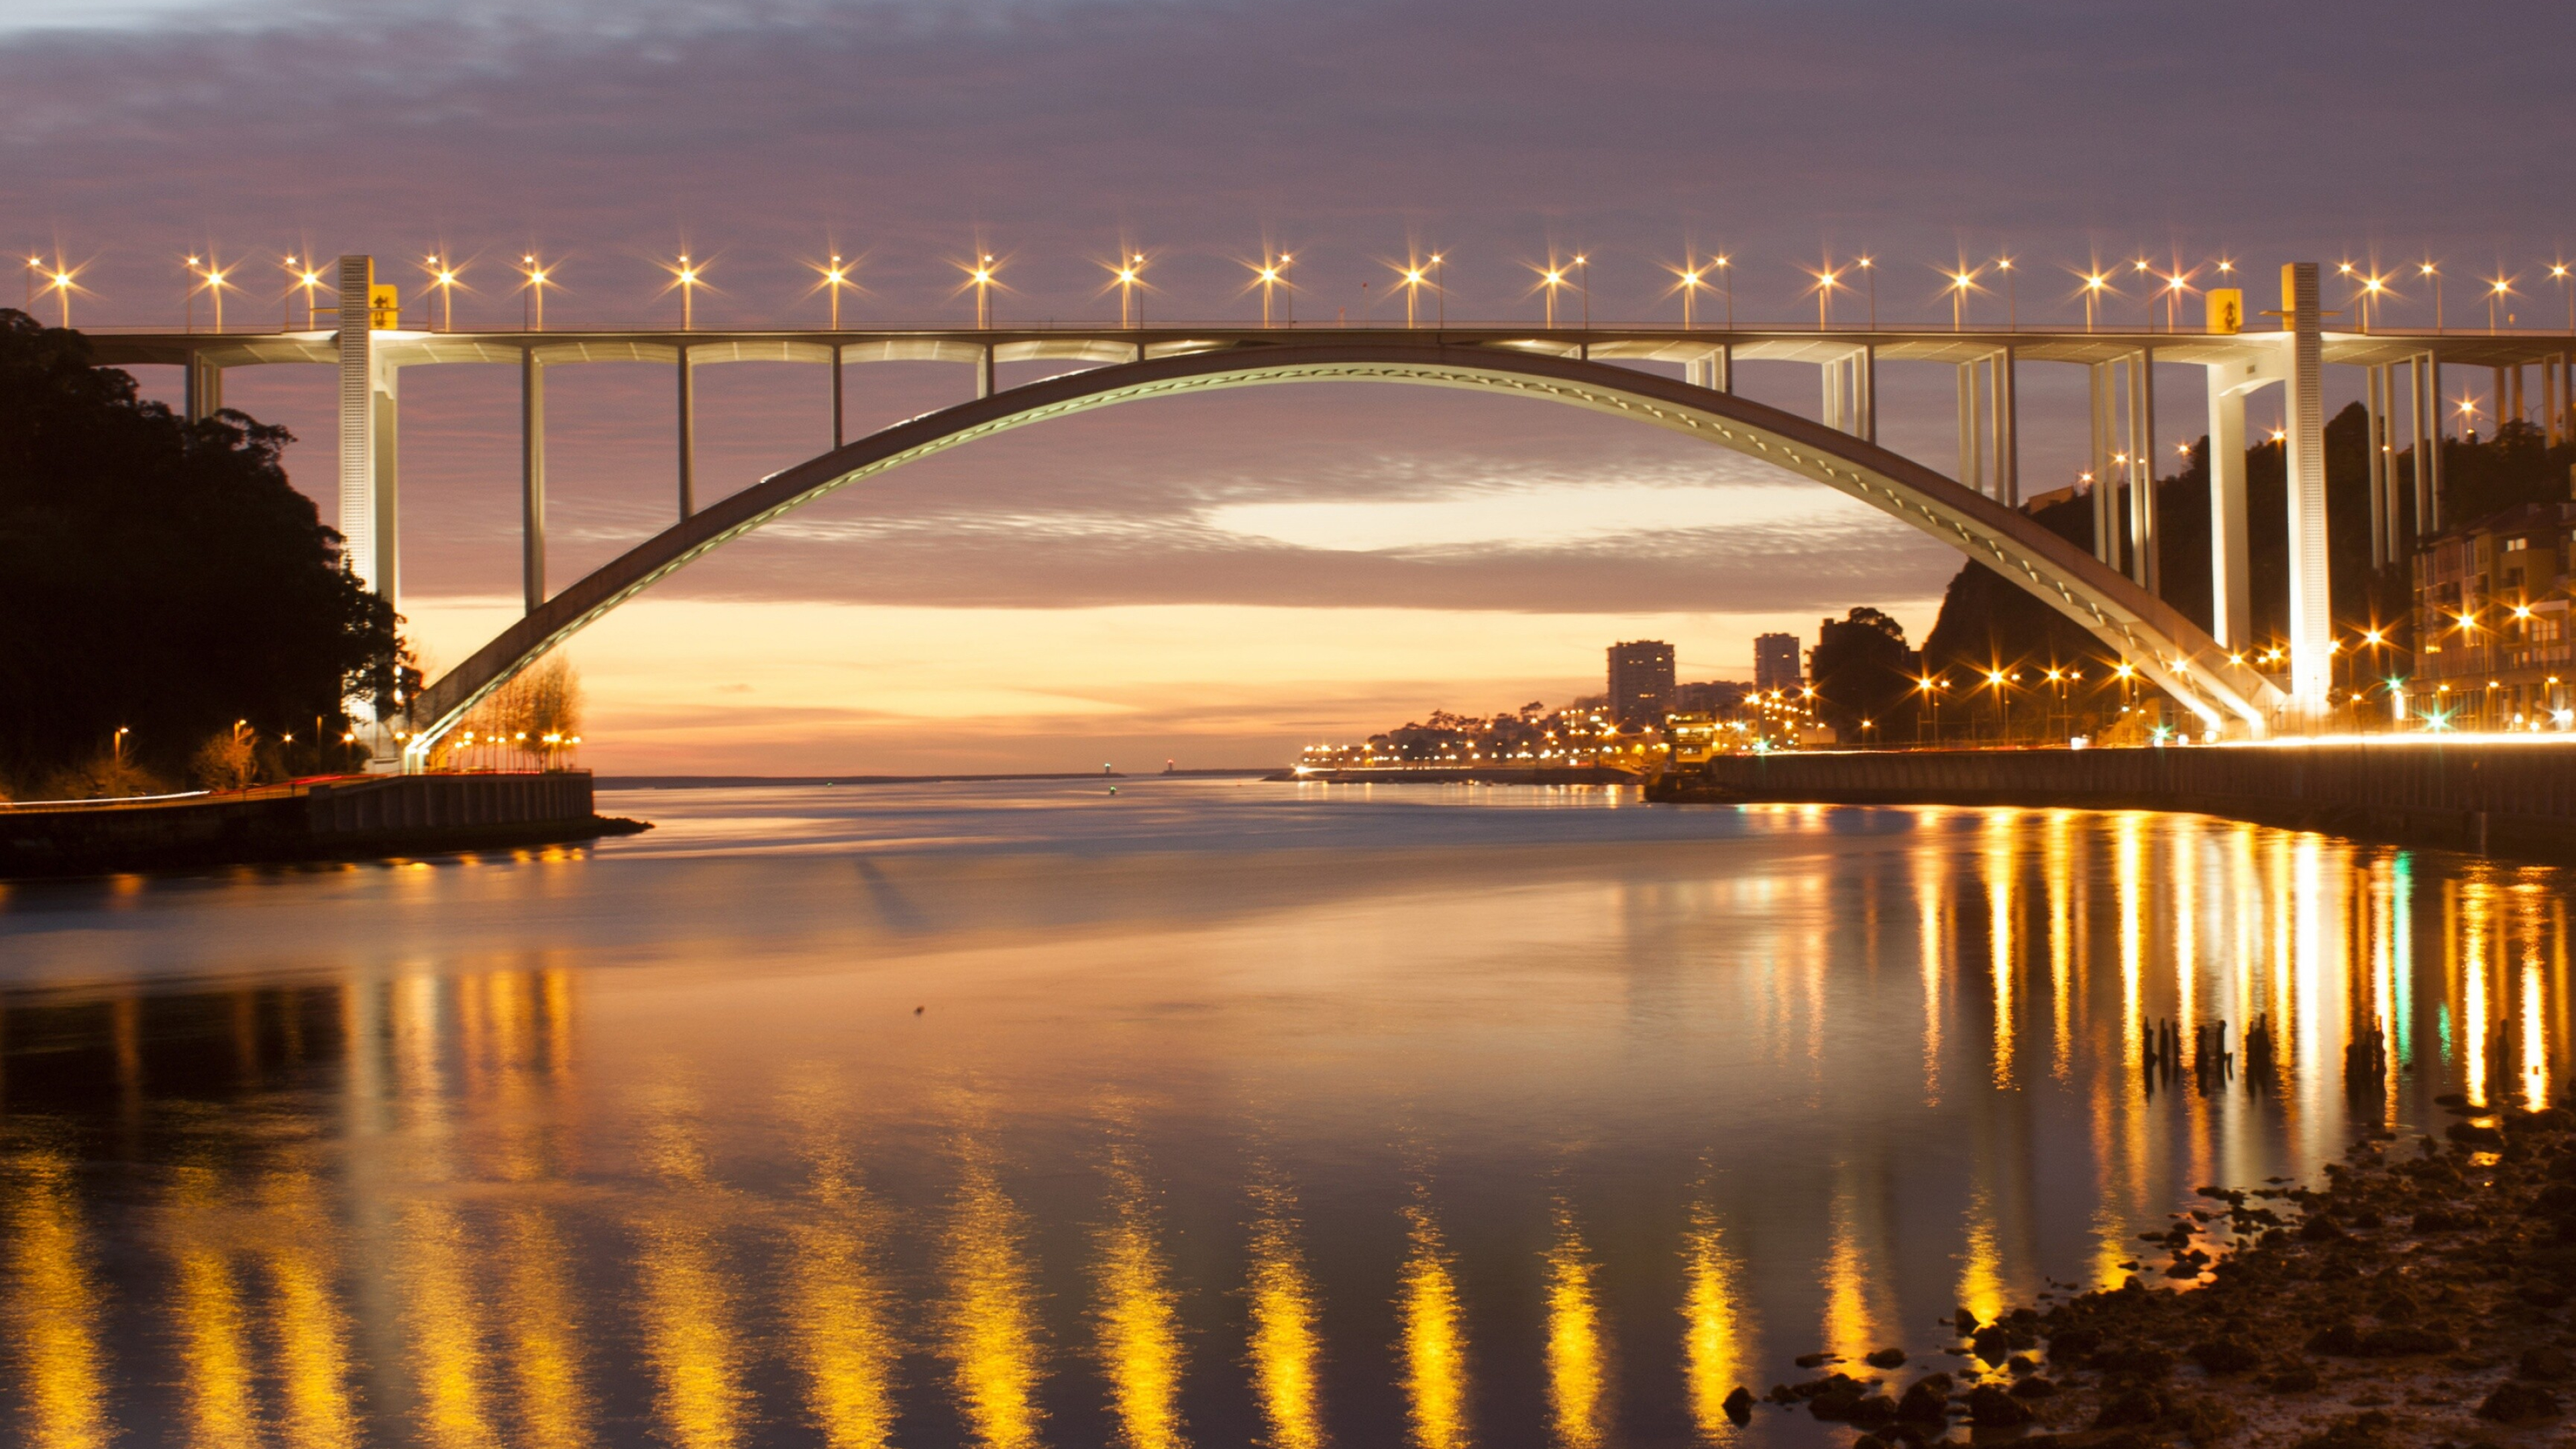 Portugal: Ponte Arrabida, Porto, The country features the westernmost point in continental Europe. 3840x2160 4K Wallpaper.